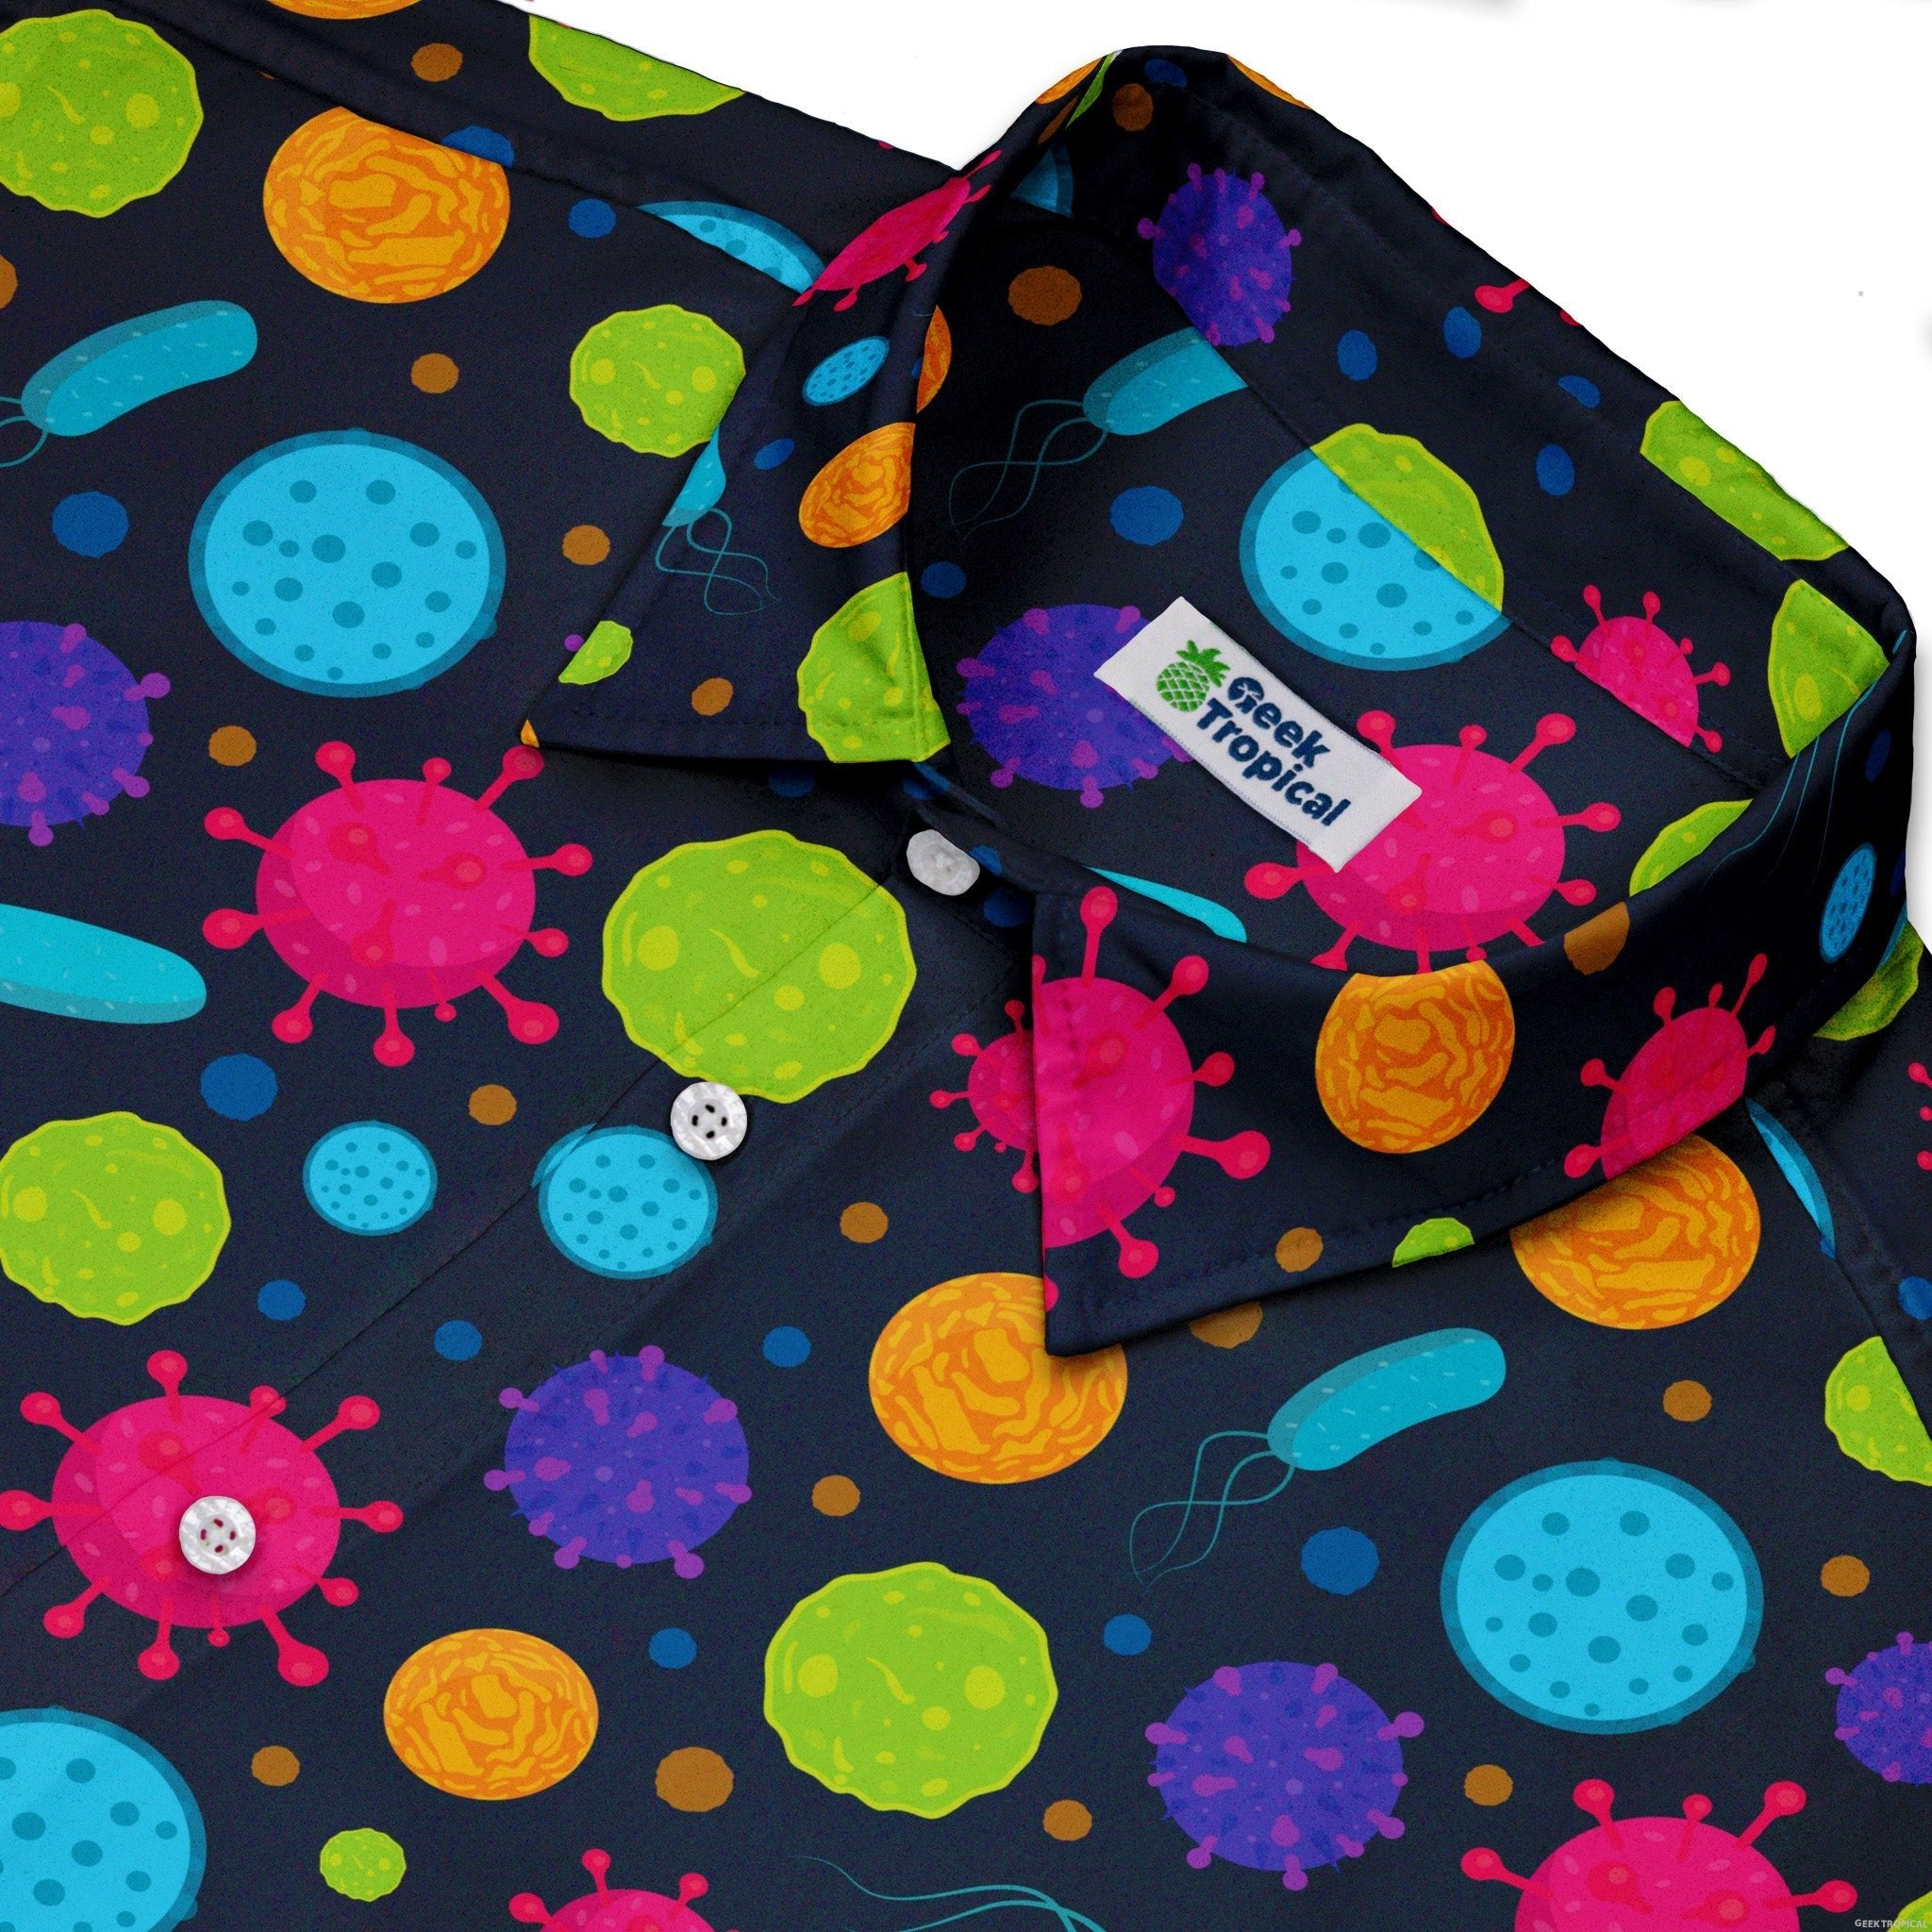 Science Microbiology Rainbow Navy Button Up Shirt - adult sizing - science print -